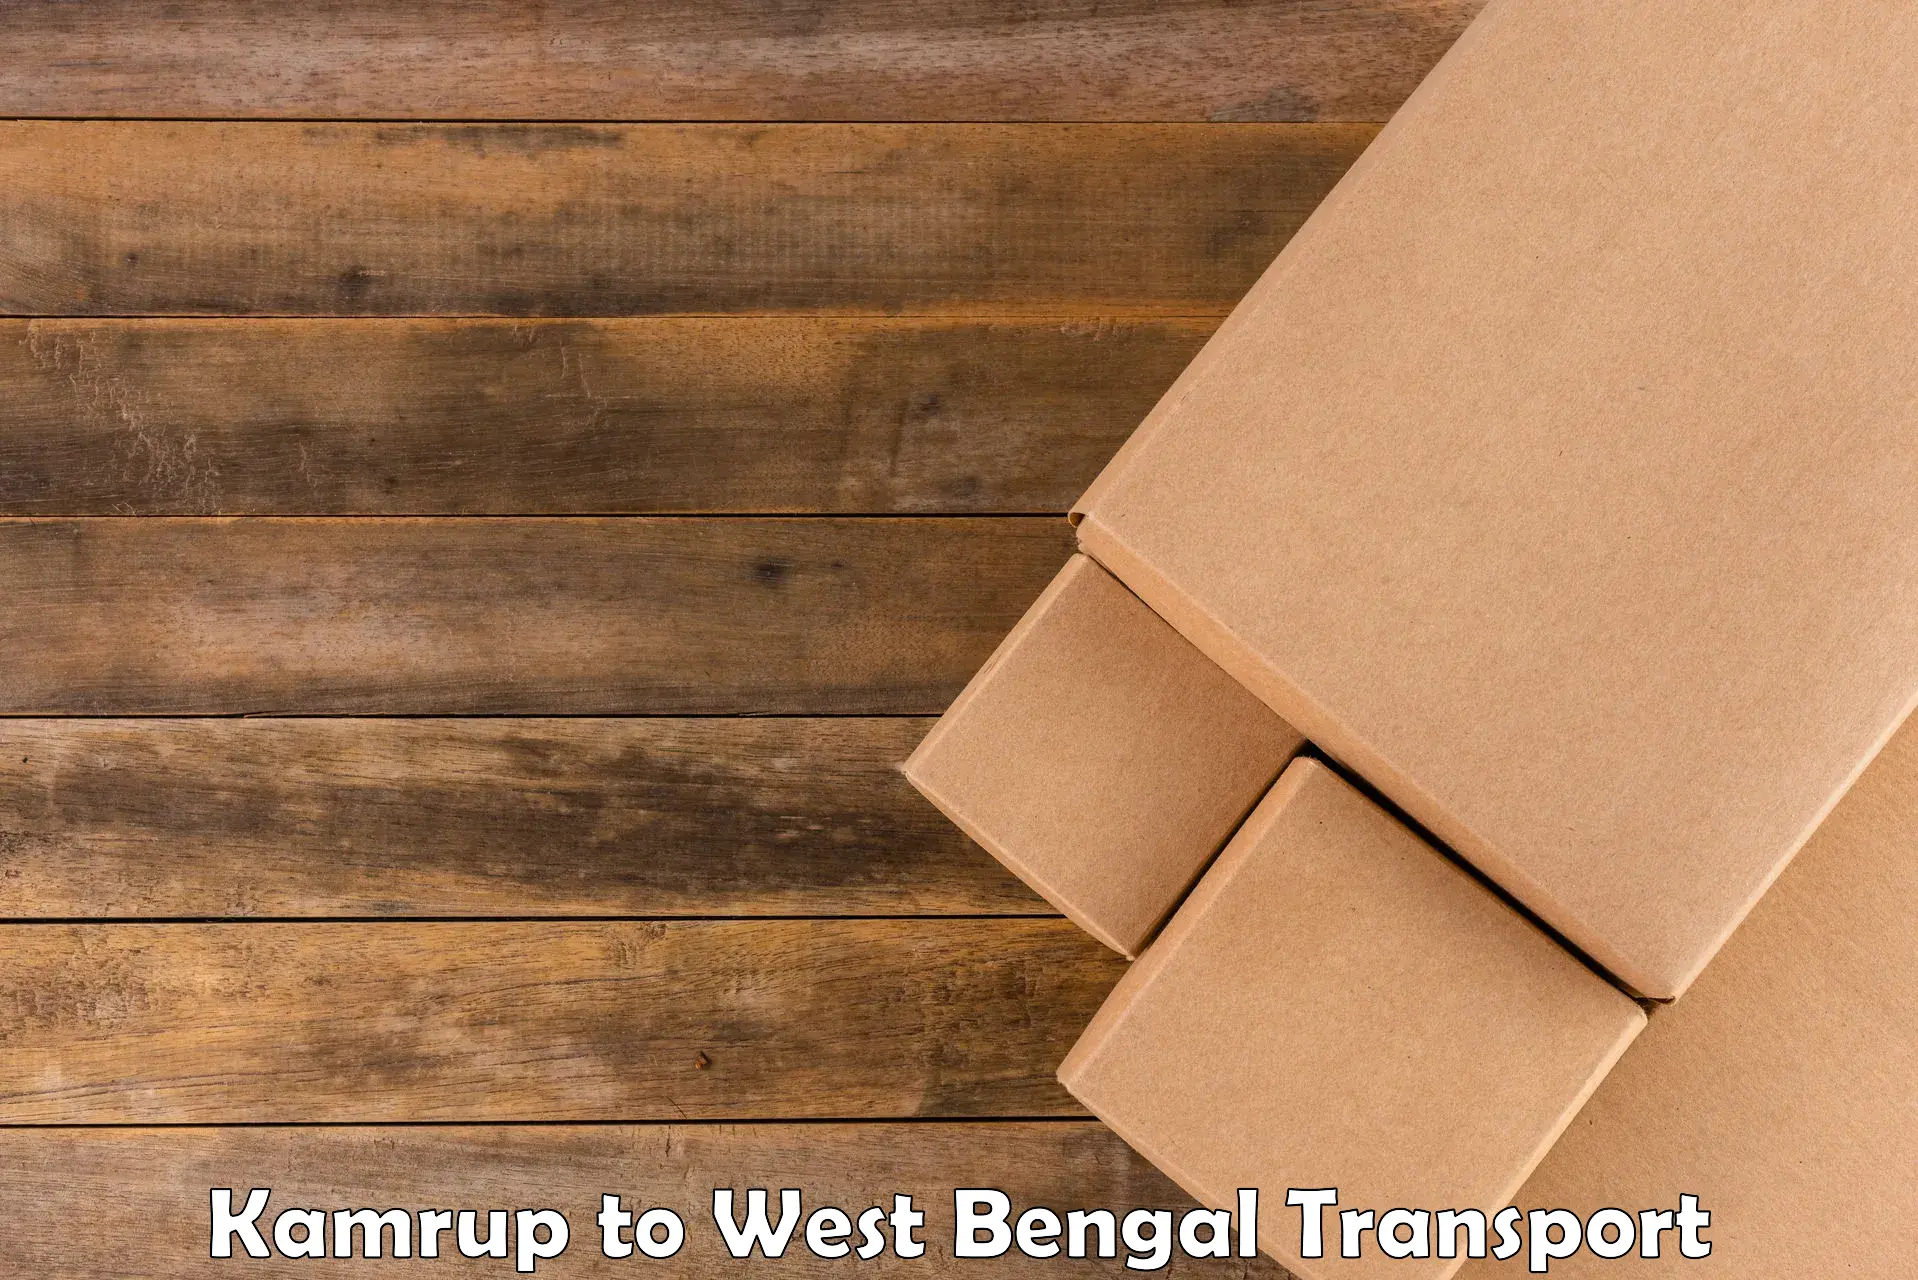 Nearby transport service in Kamrup to Bagdogra